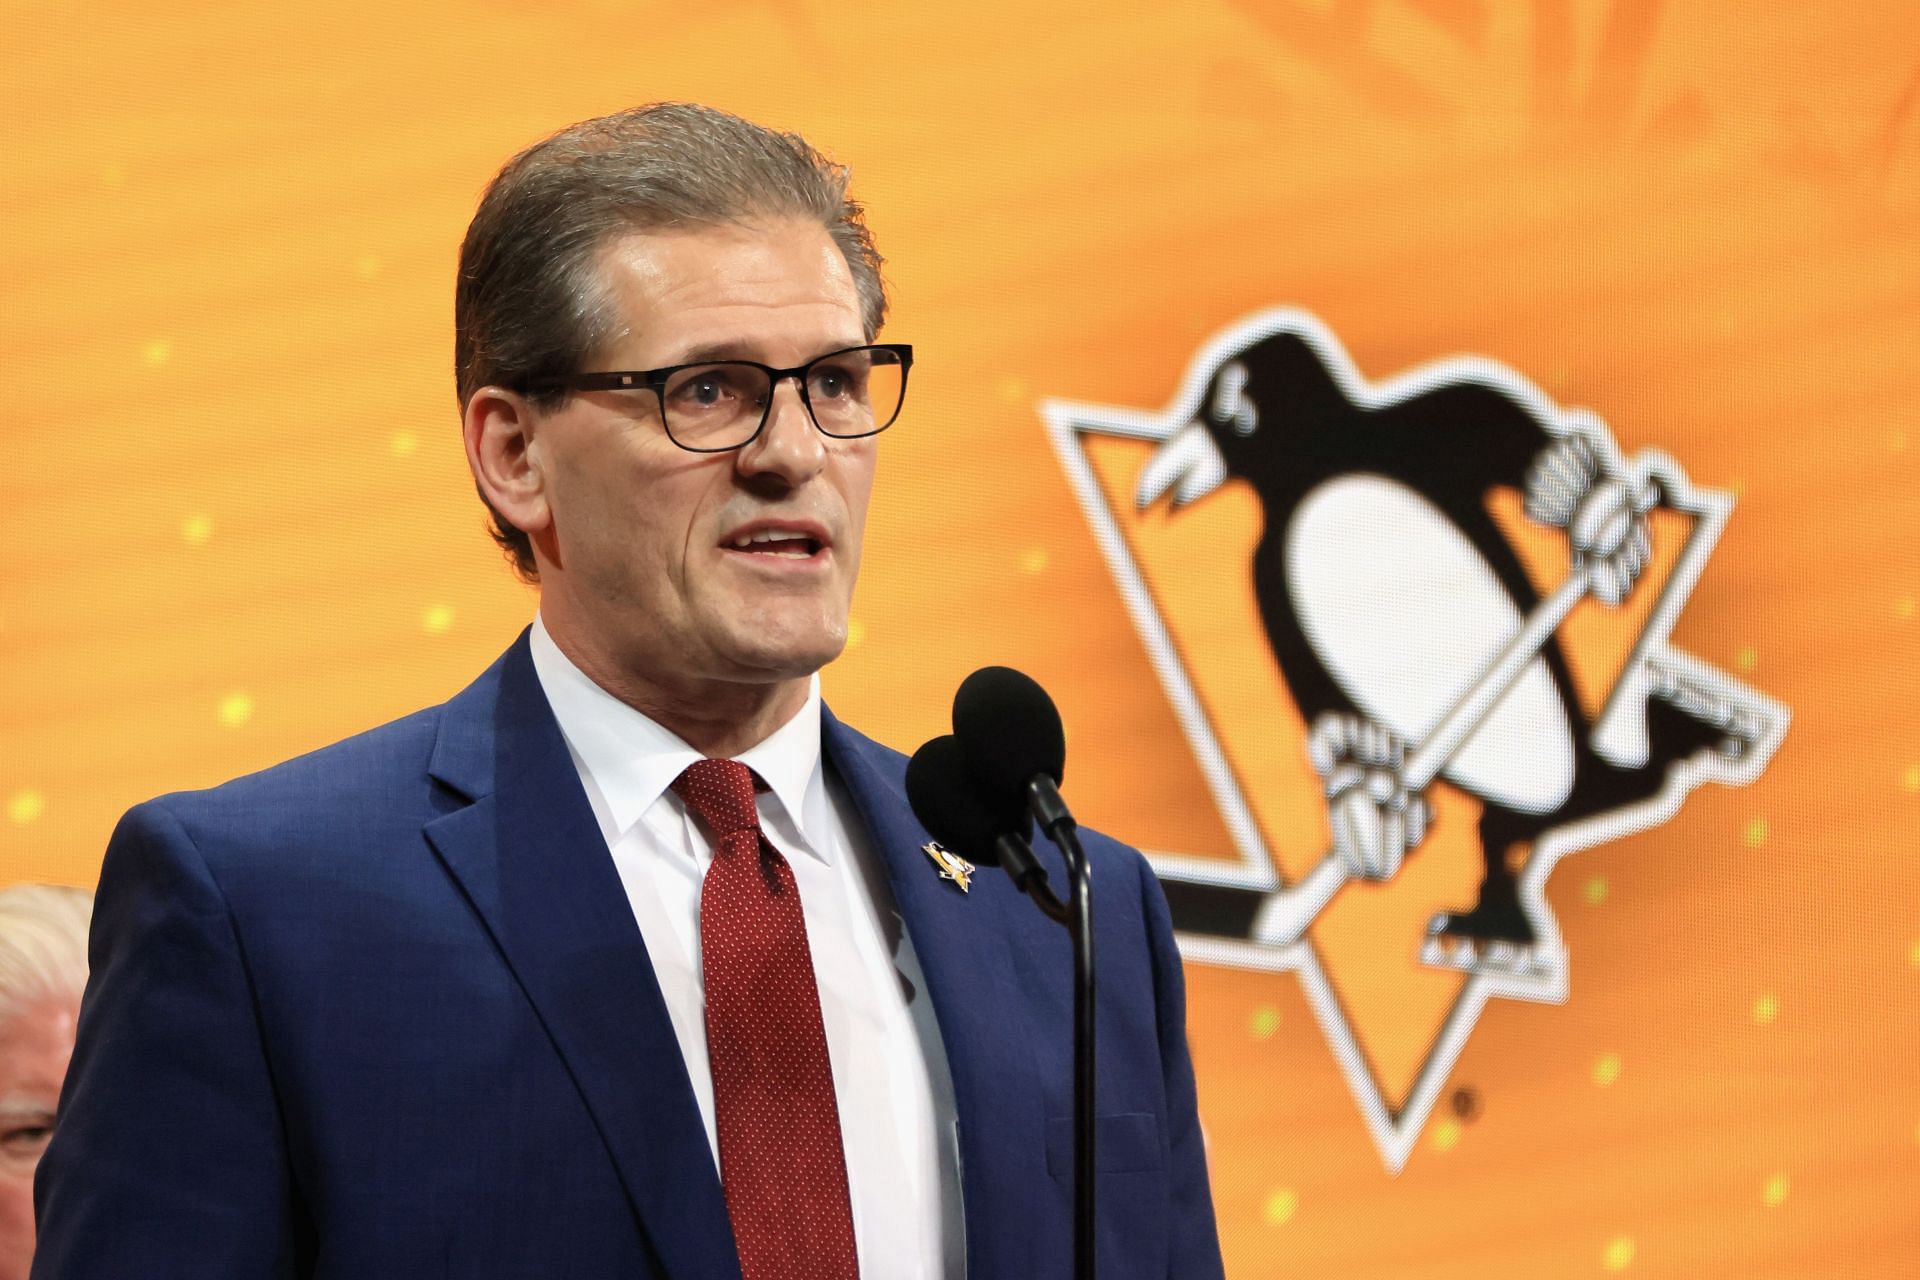 Ron Hextall at the 2022 NHL Entry Draft